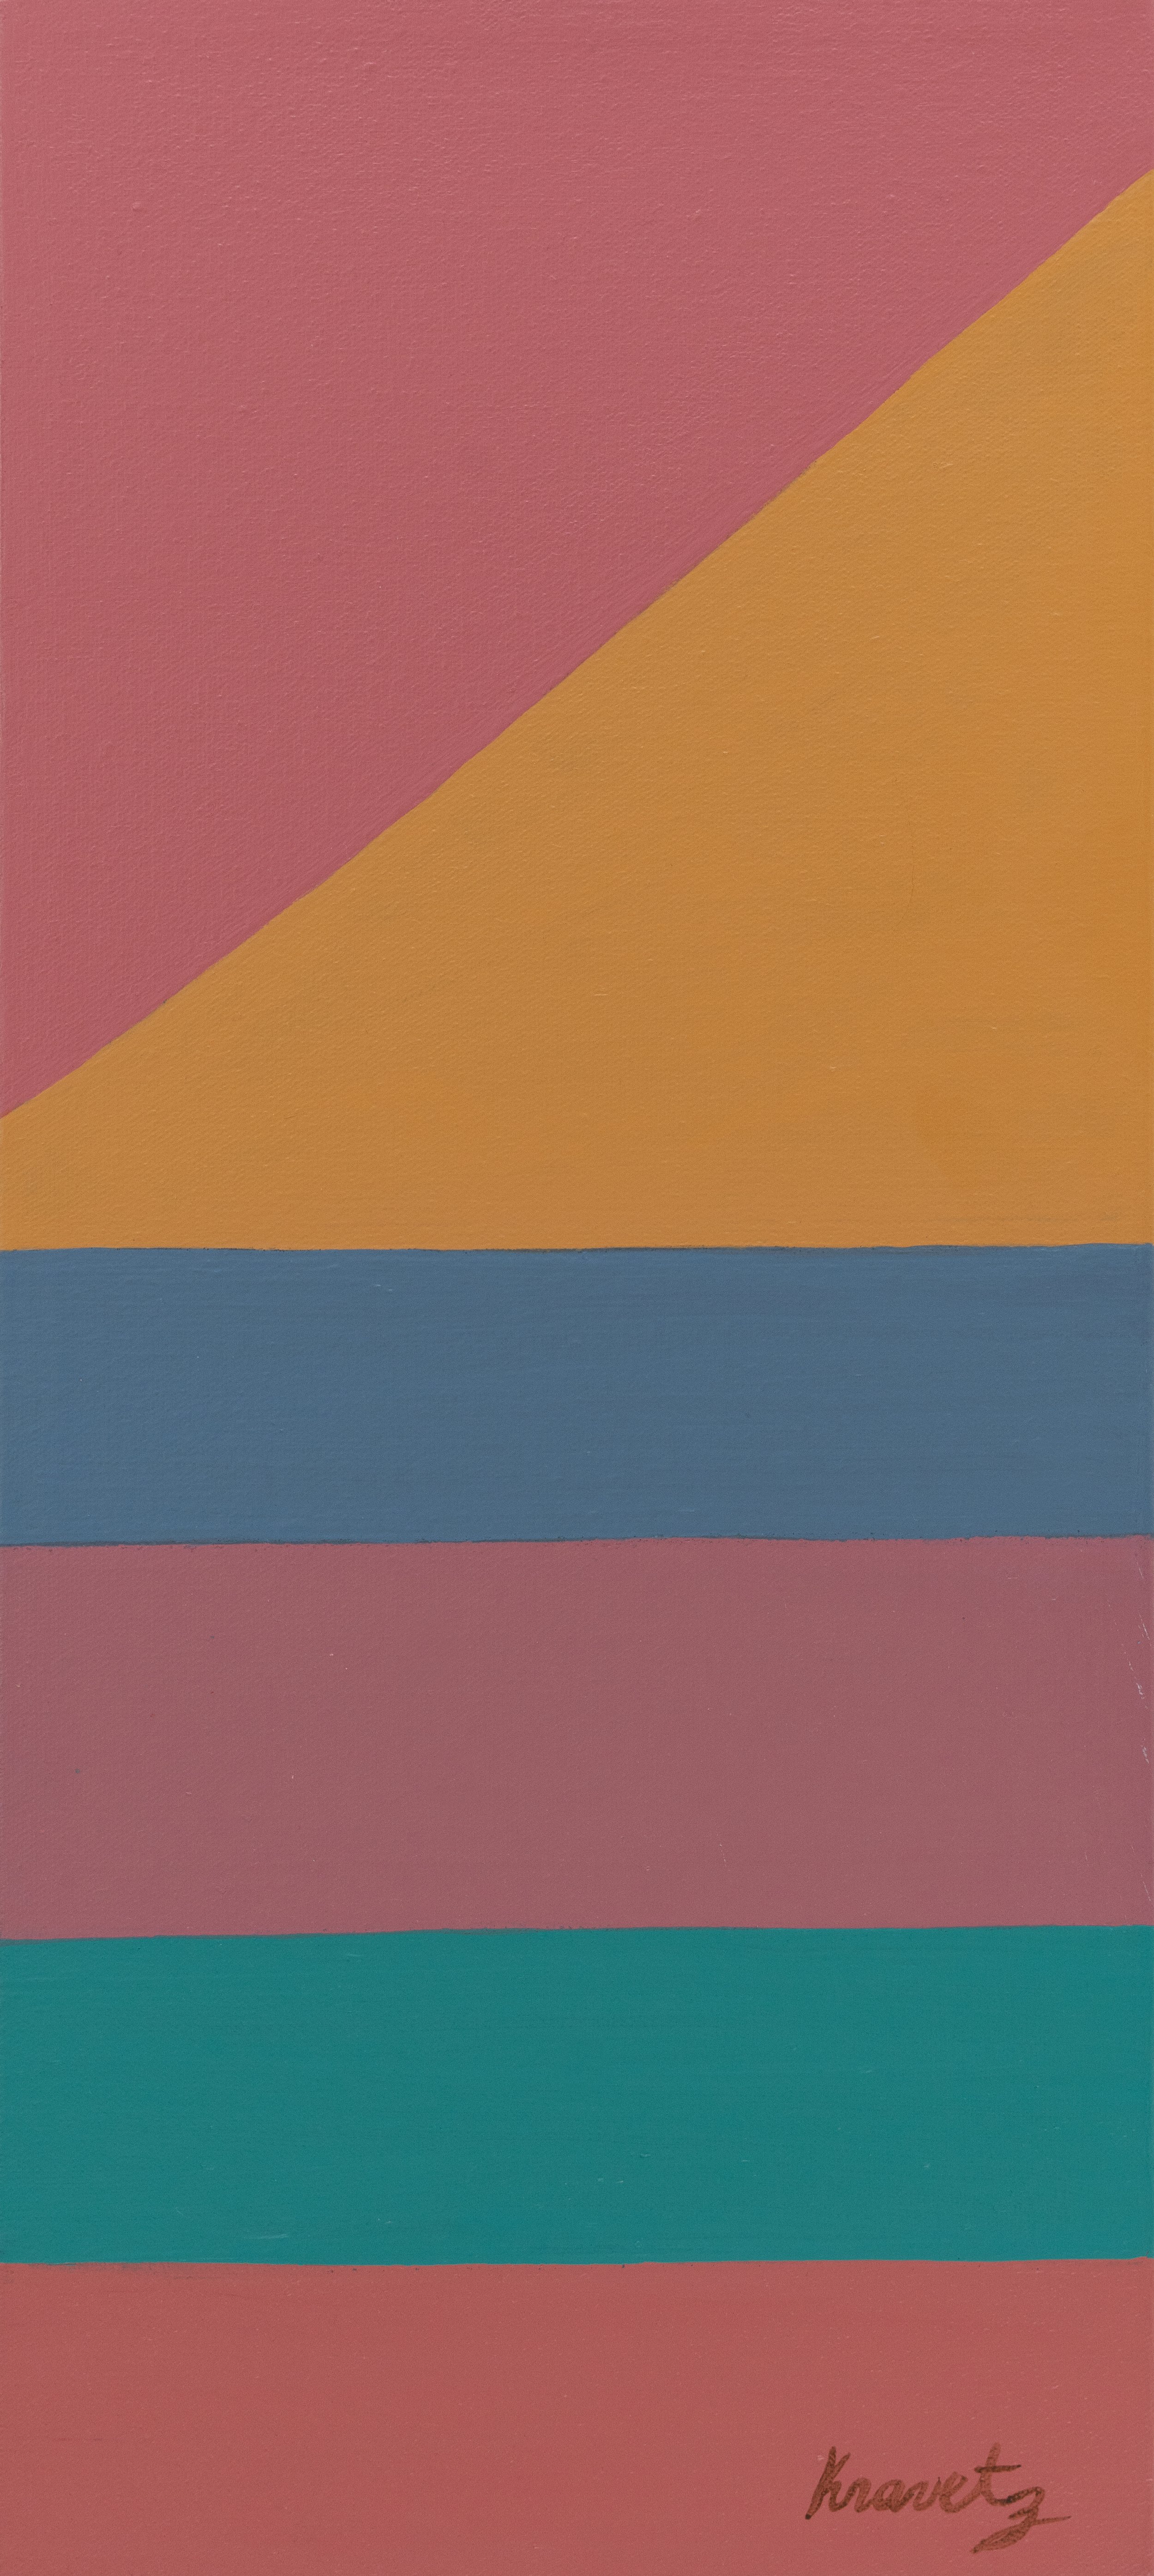 Square, Triangles and Bands of Color, 1985, acrylic on canvas, 17x8 inches